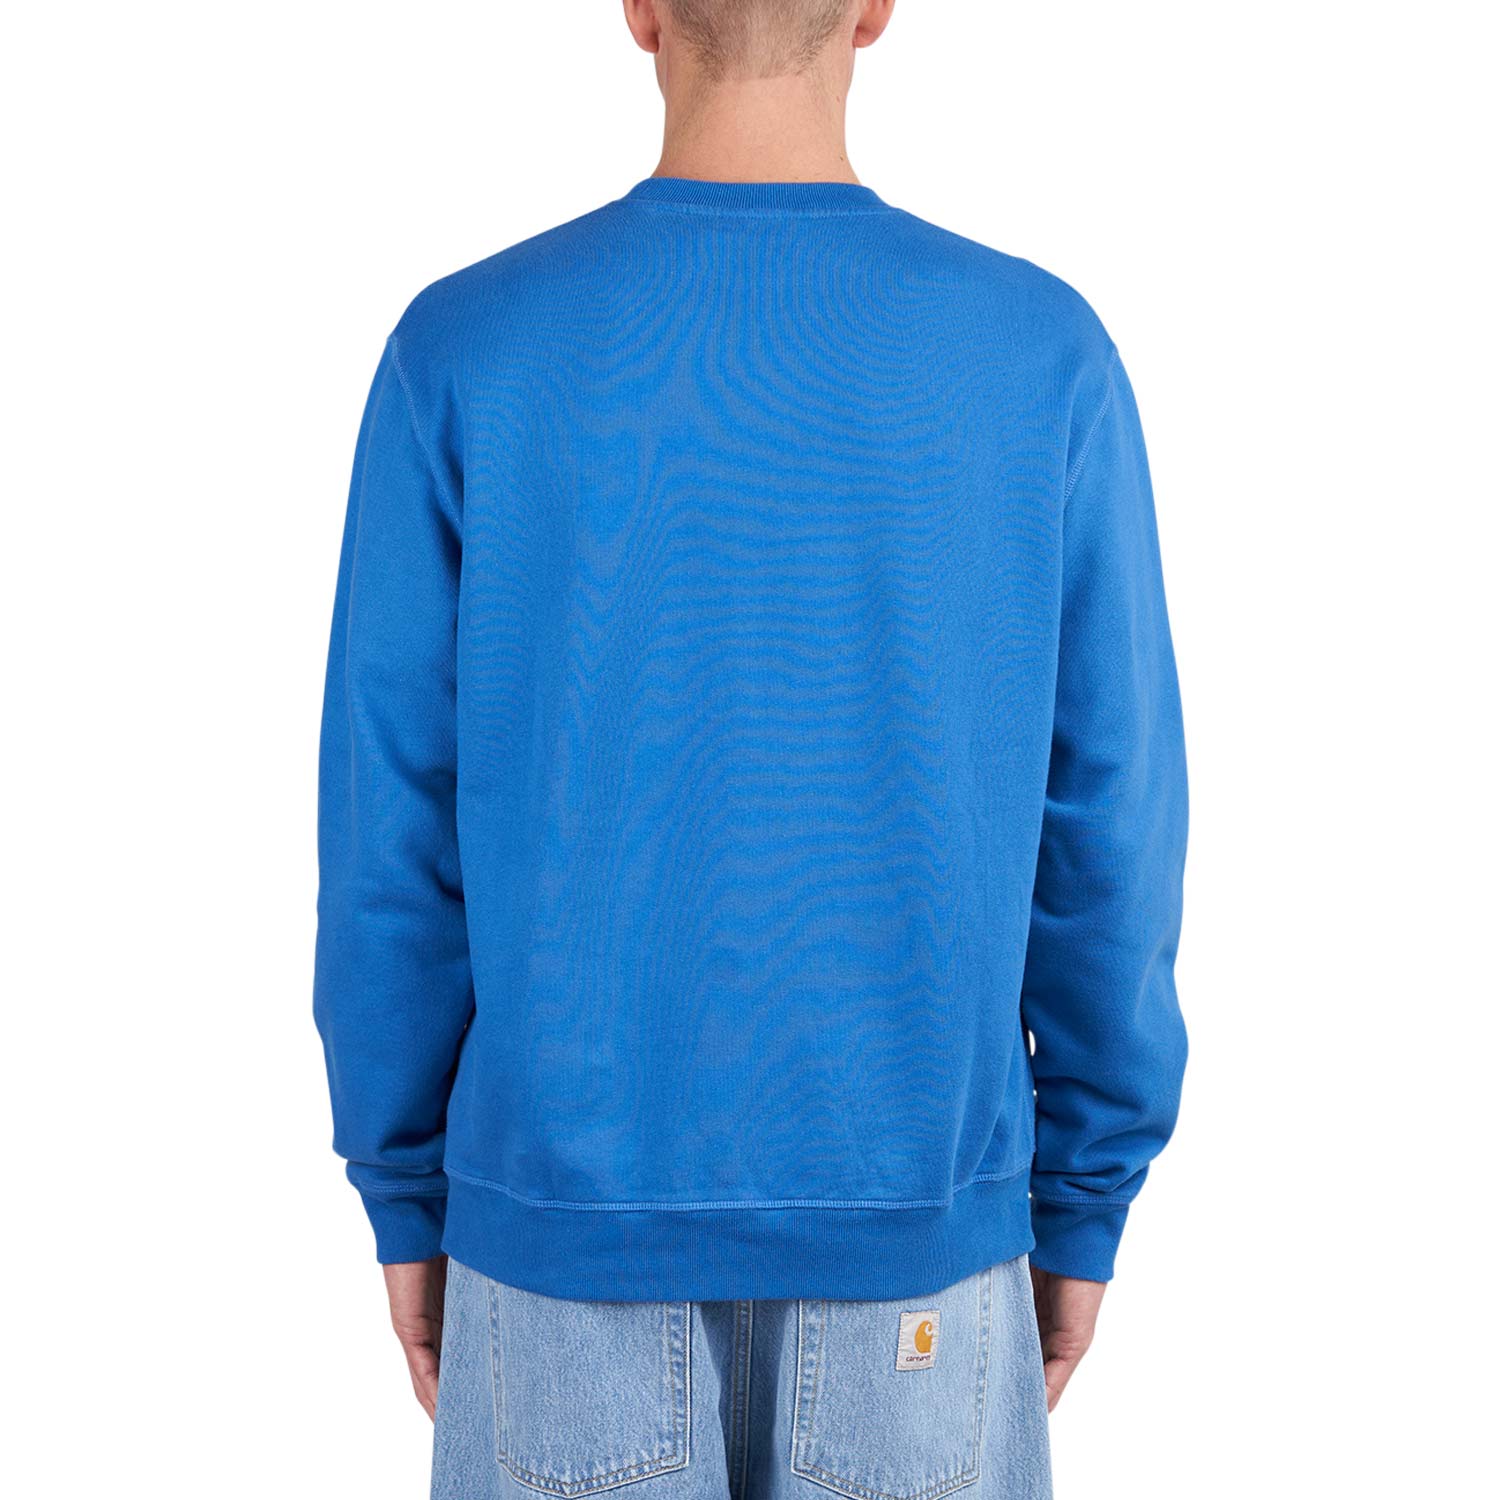 by Parra Wheel Chested Bird Sweater (Blau)  - Allike Store